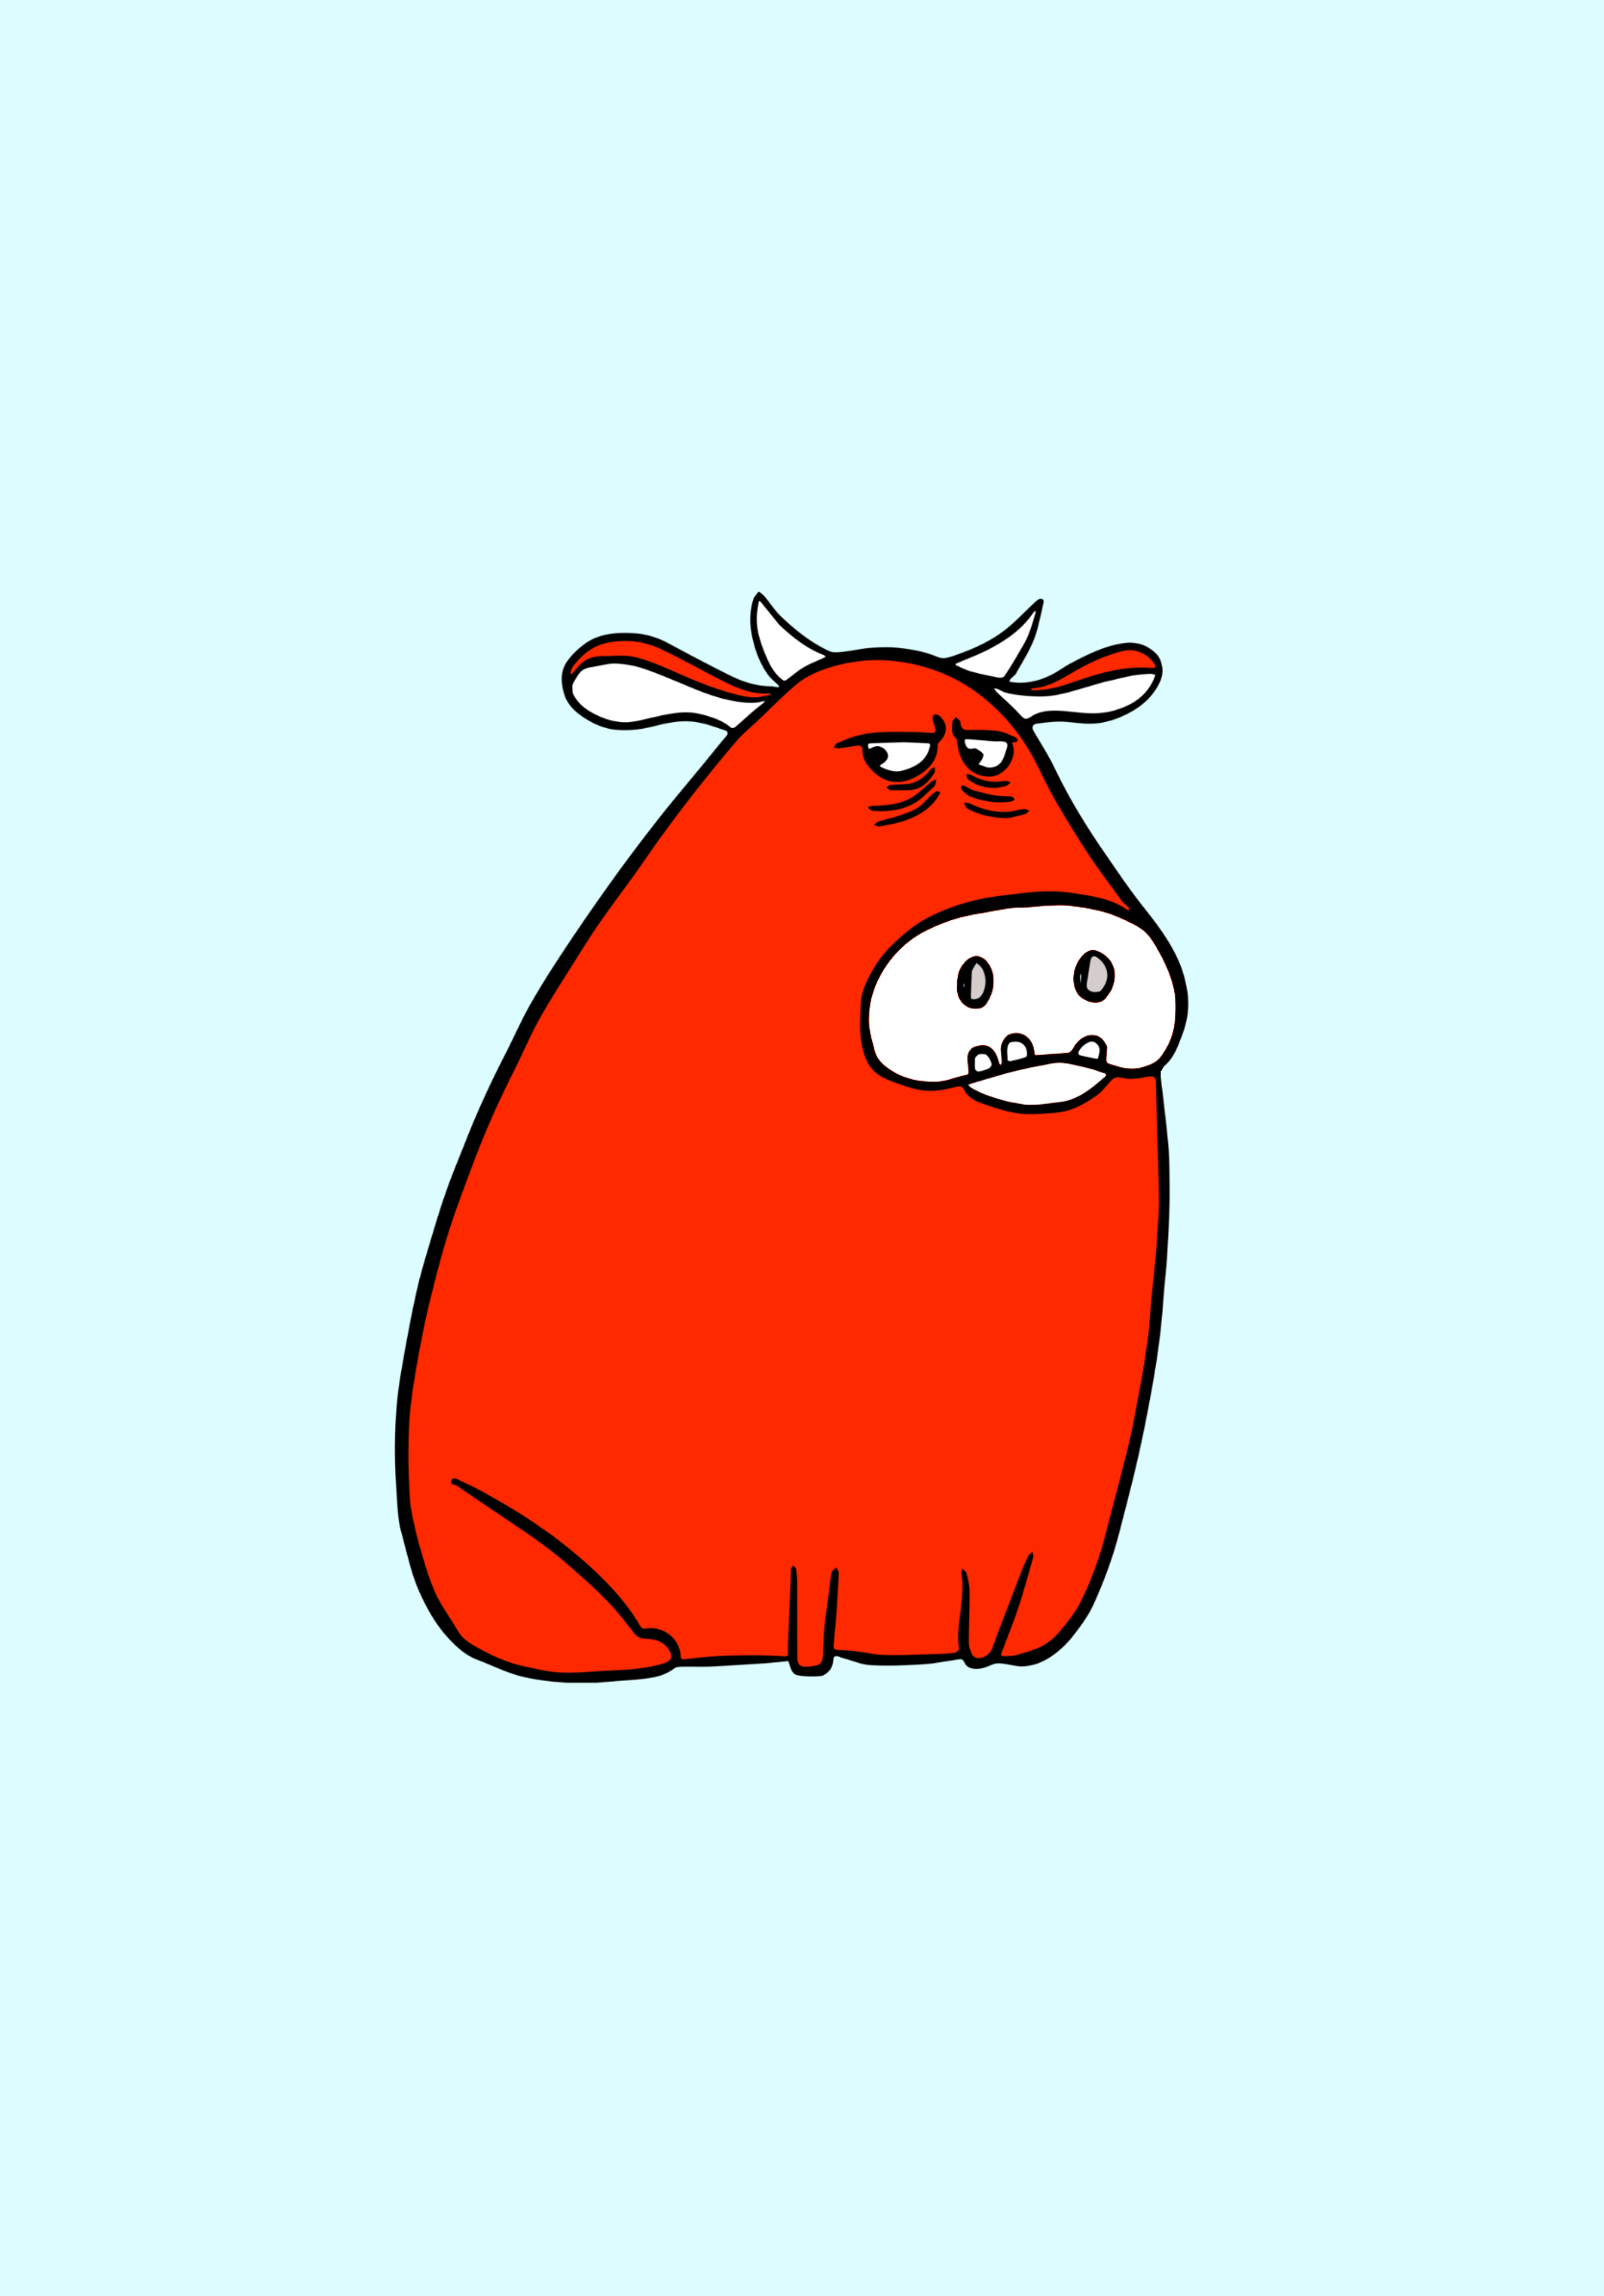 COWABANGERS - NOT SO LAUGHING COW #3